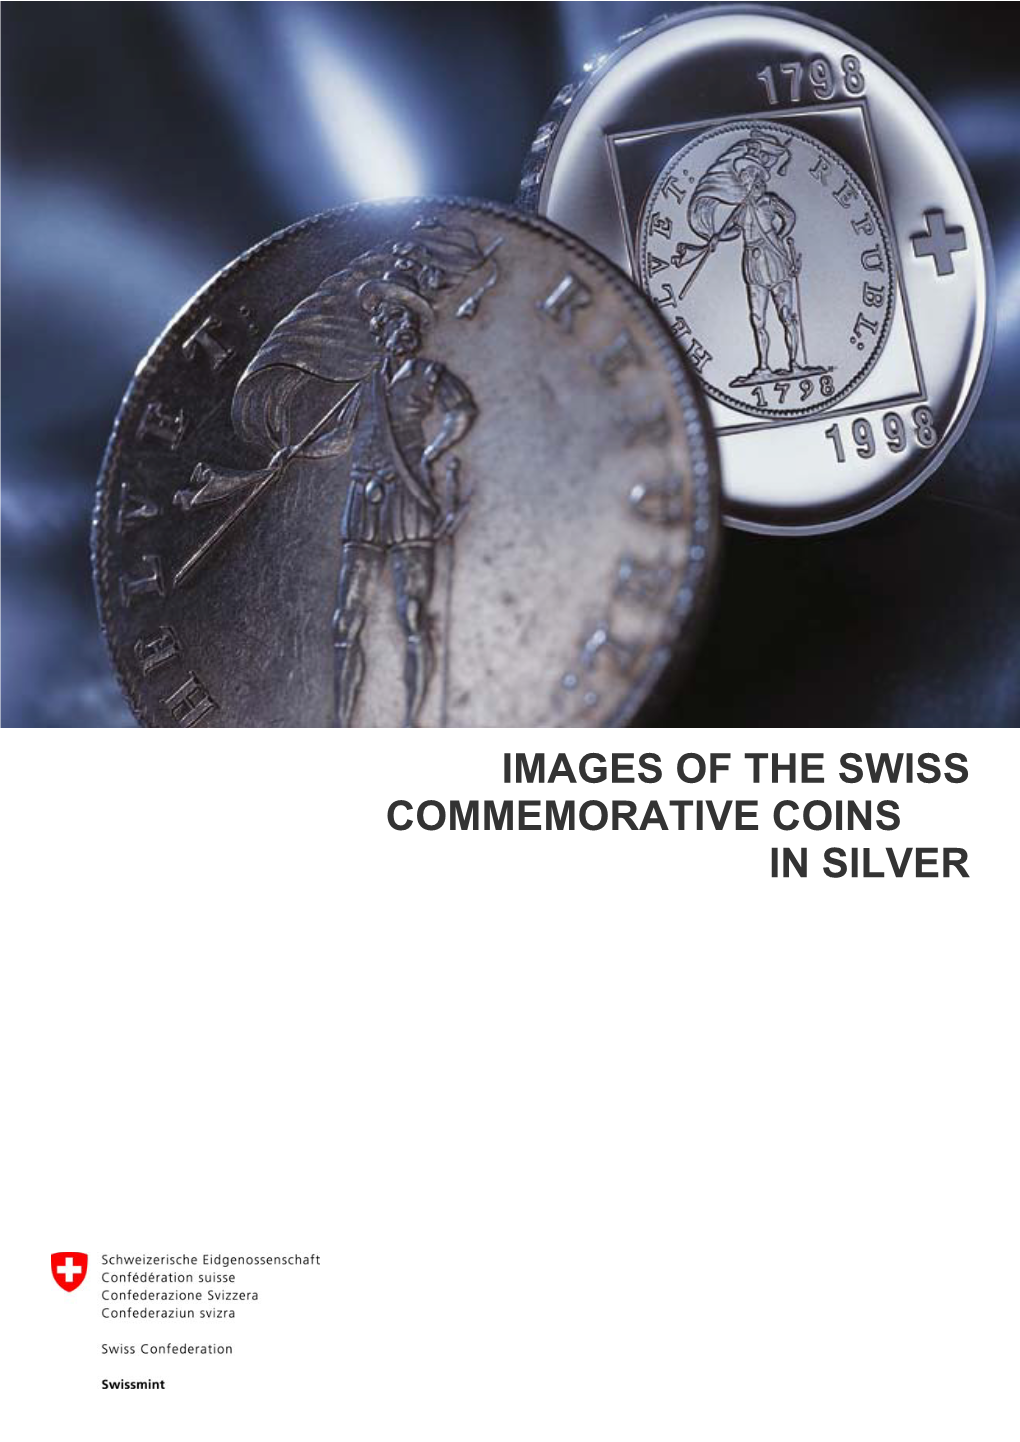 Images of the Swiss Commemorative Coins in Silver